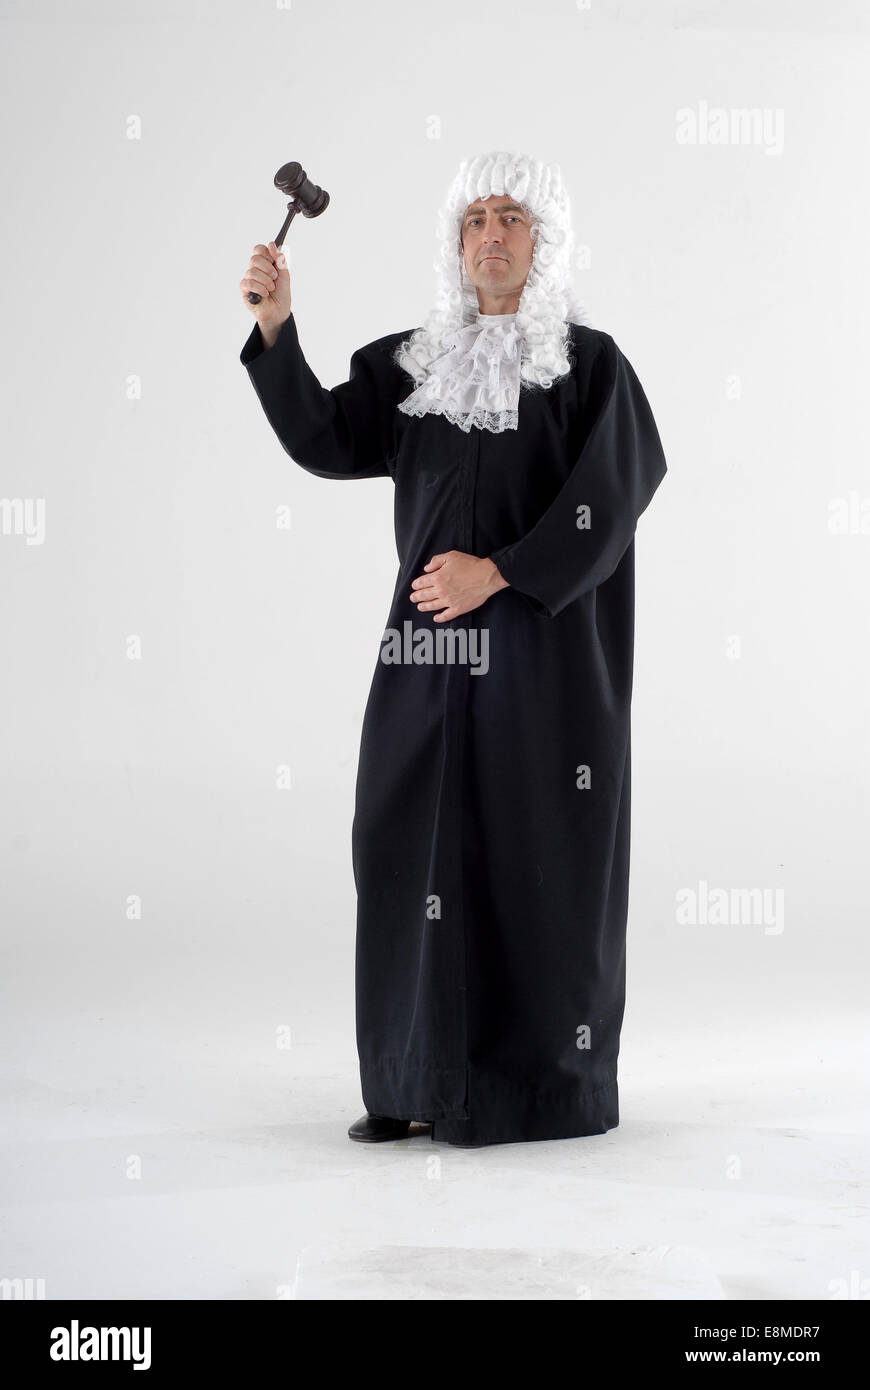 man in fancy dress comedy costume as an english judge, with wig, gown and gavel shot against a white background Stock Photo